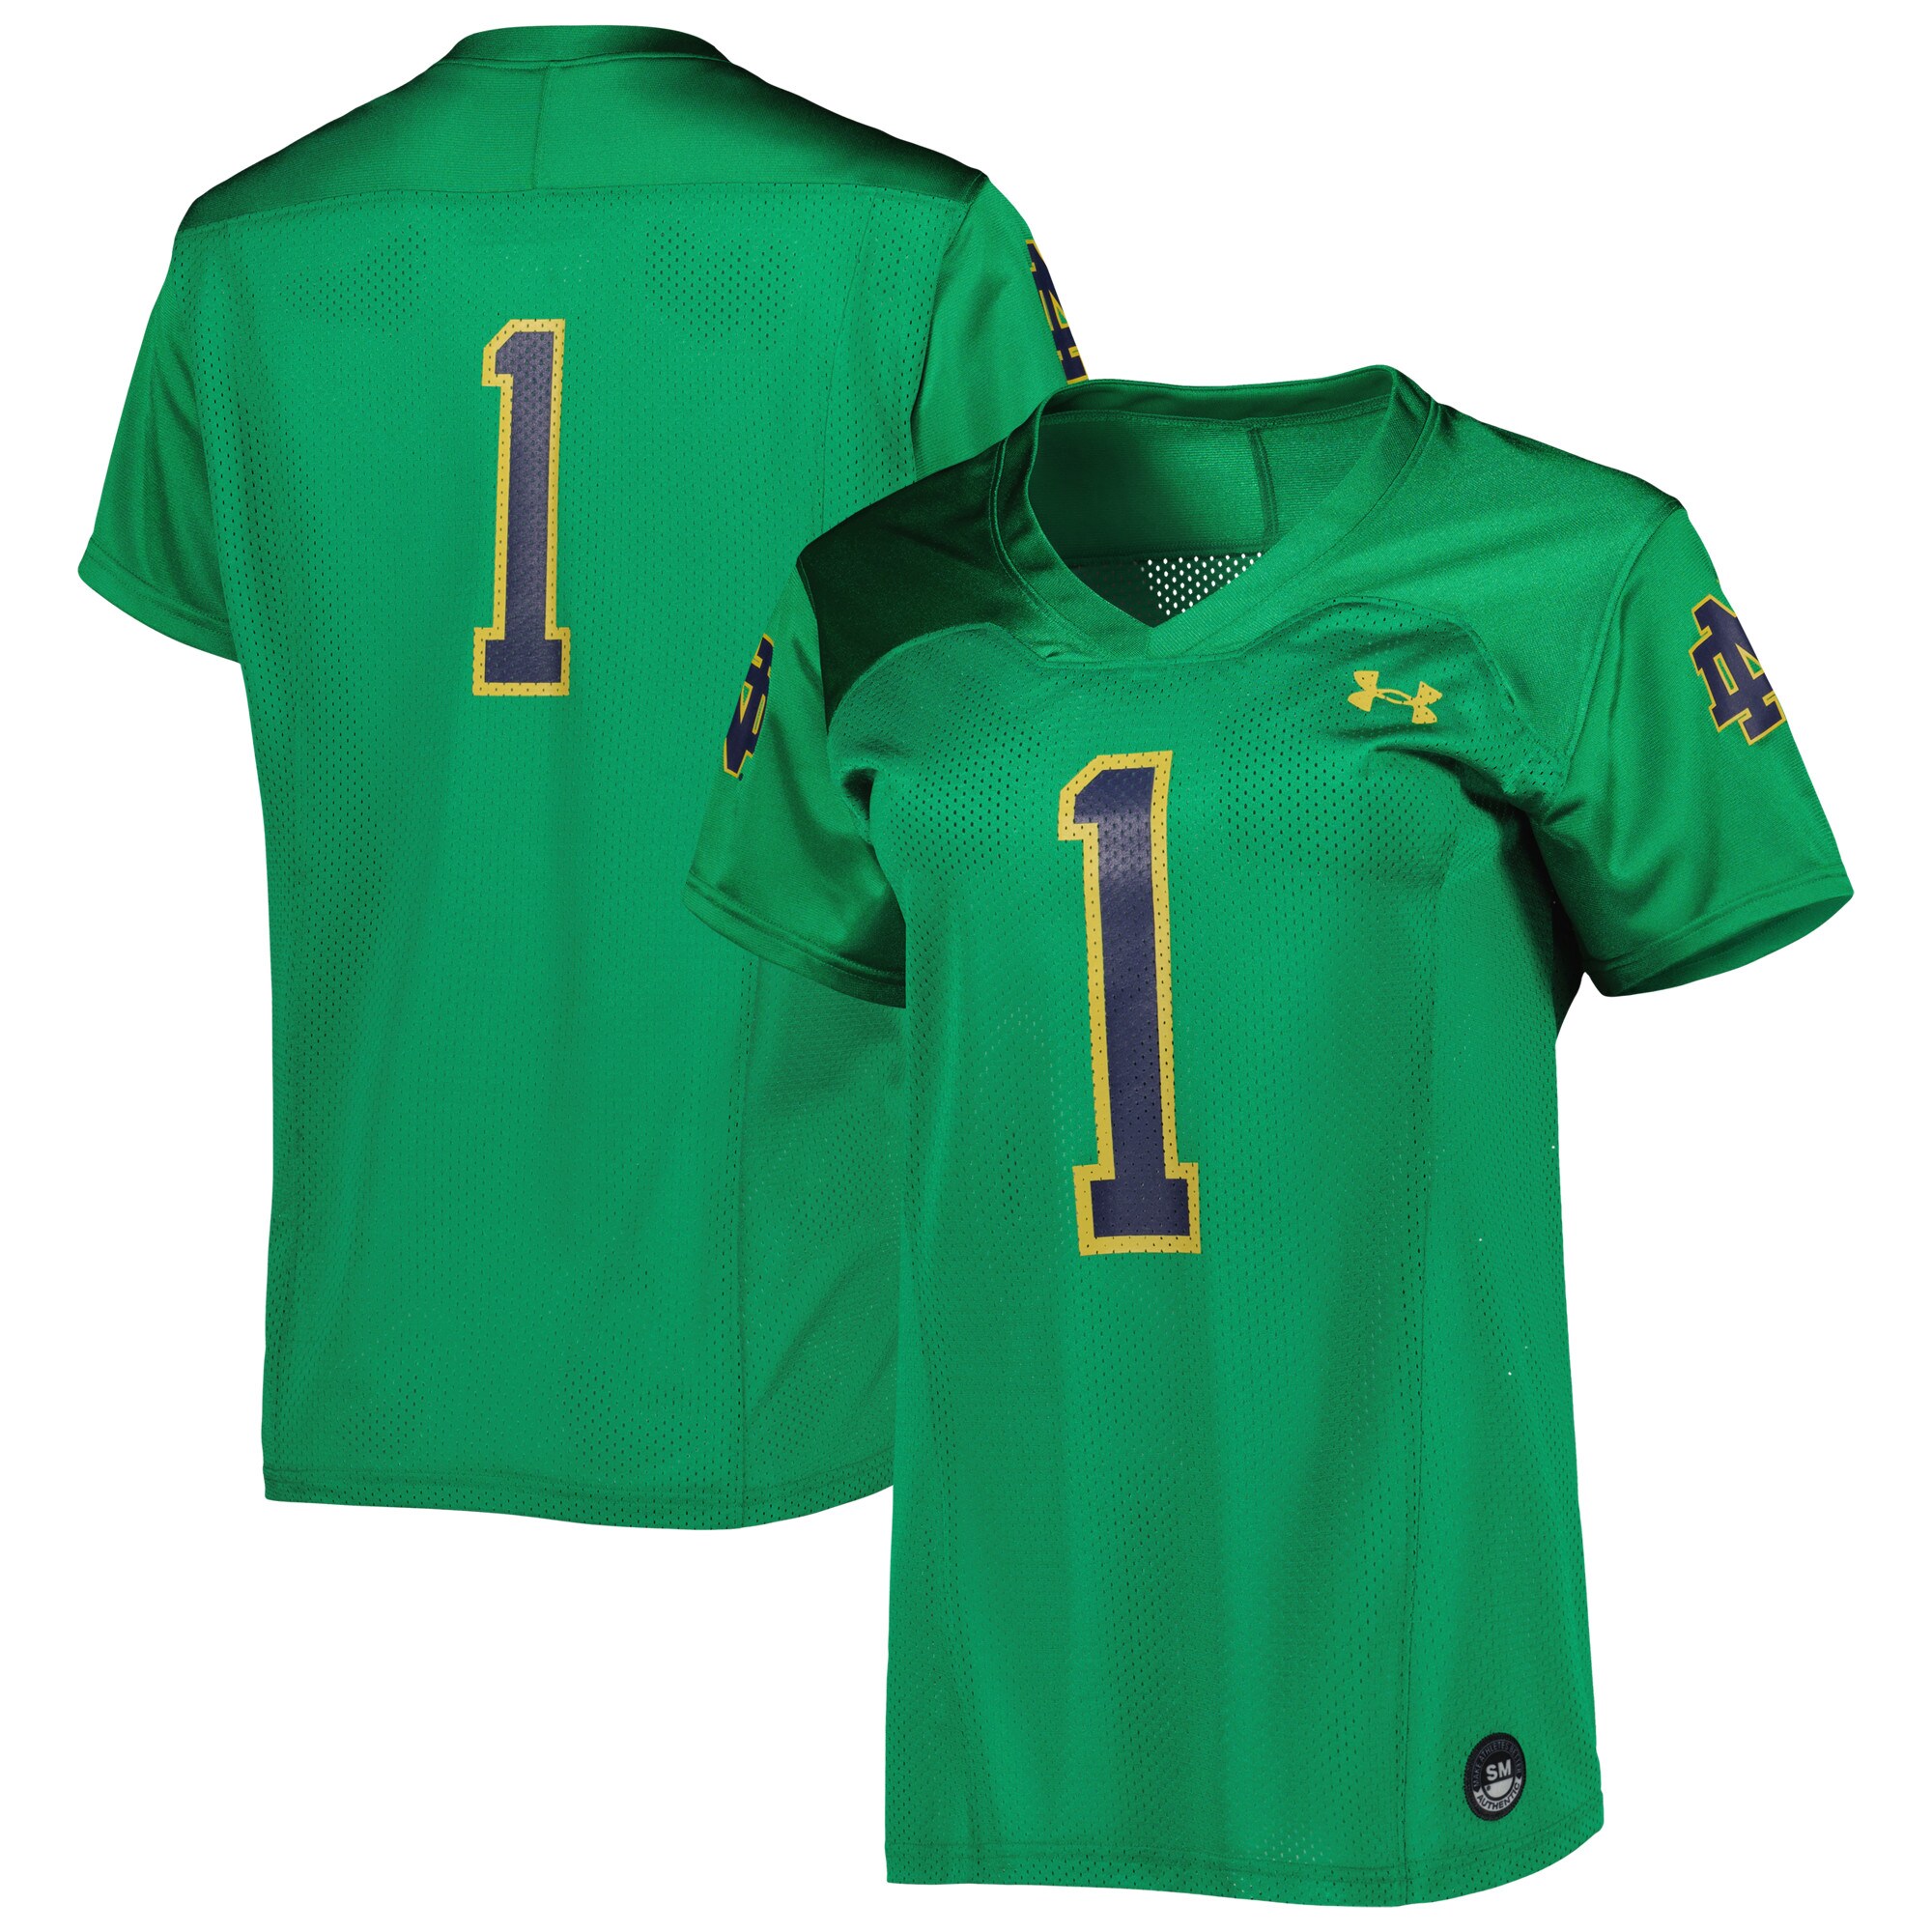 #1 Notre Dame Fighting Irish Under Armour Women'S Replica  Football Shirts Jersey - Kelly Green For Youth Women Men